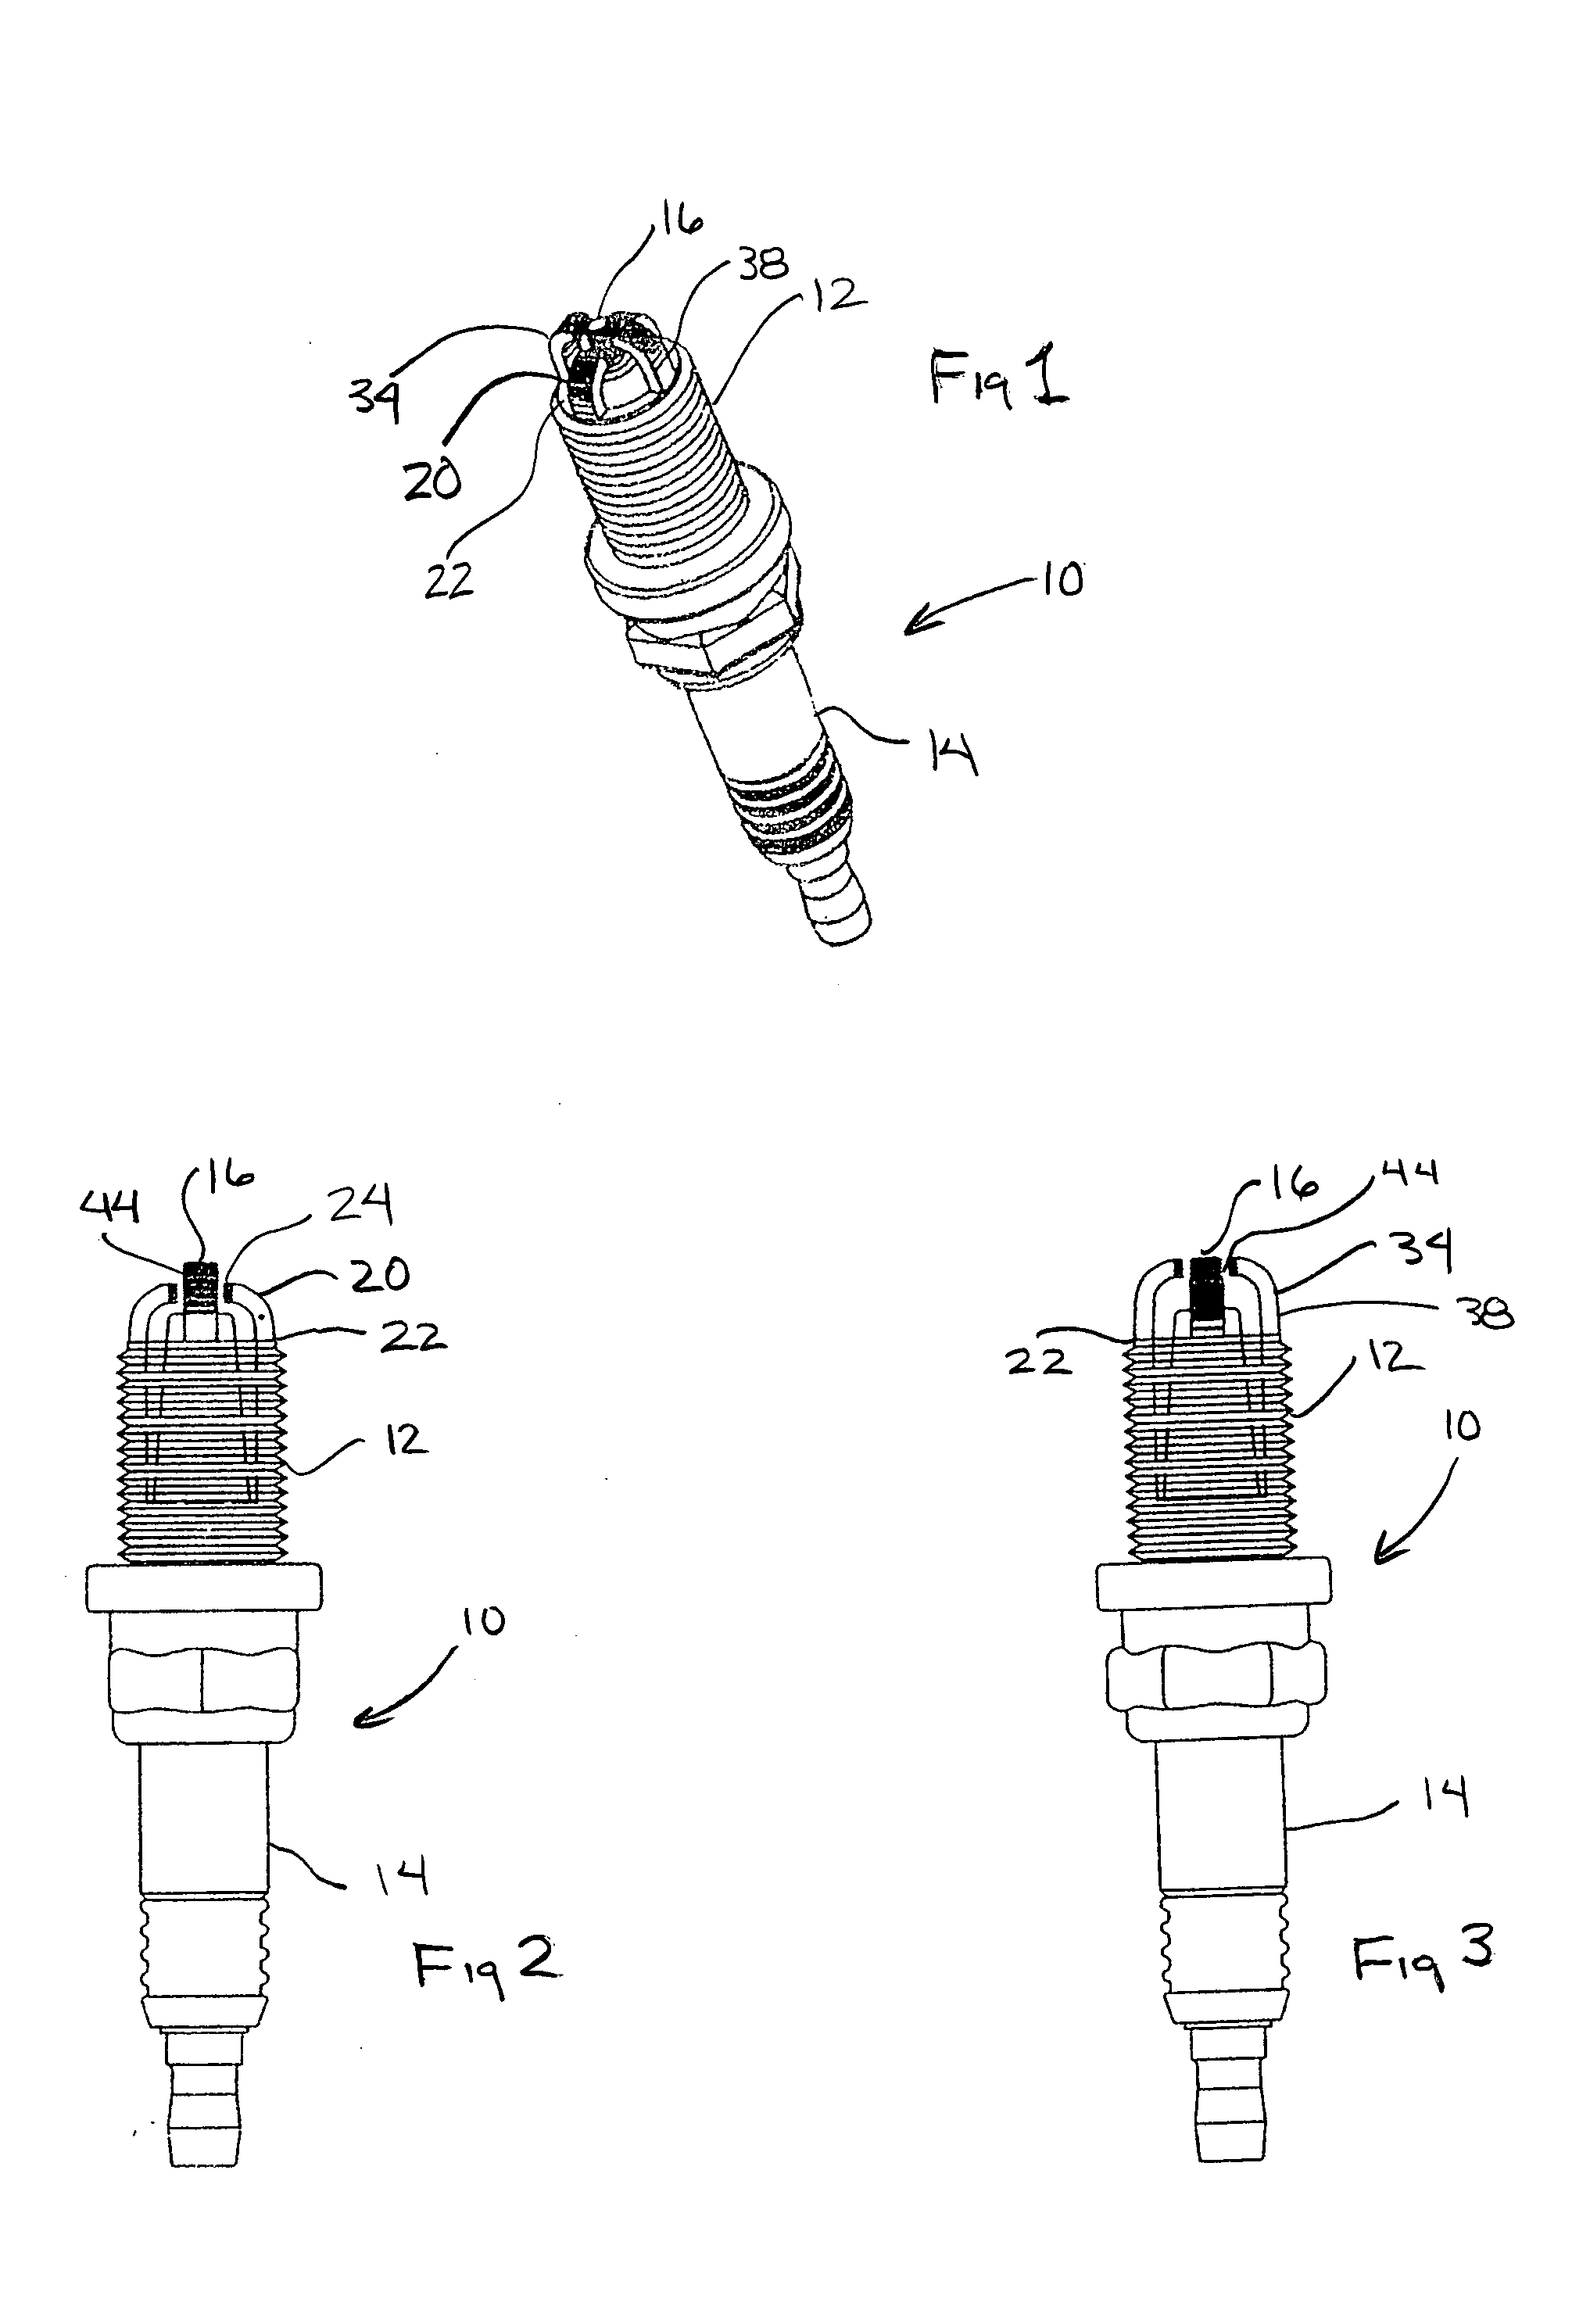 Spark plug having a reference electrode and an elongated electrode